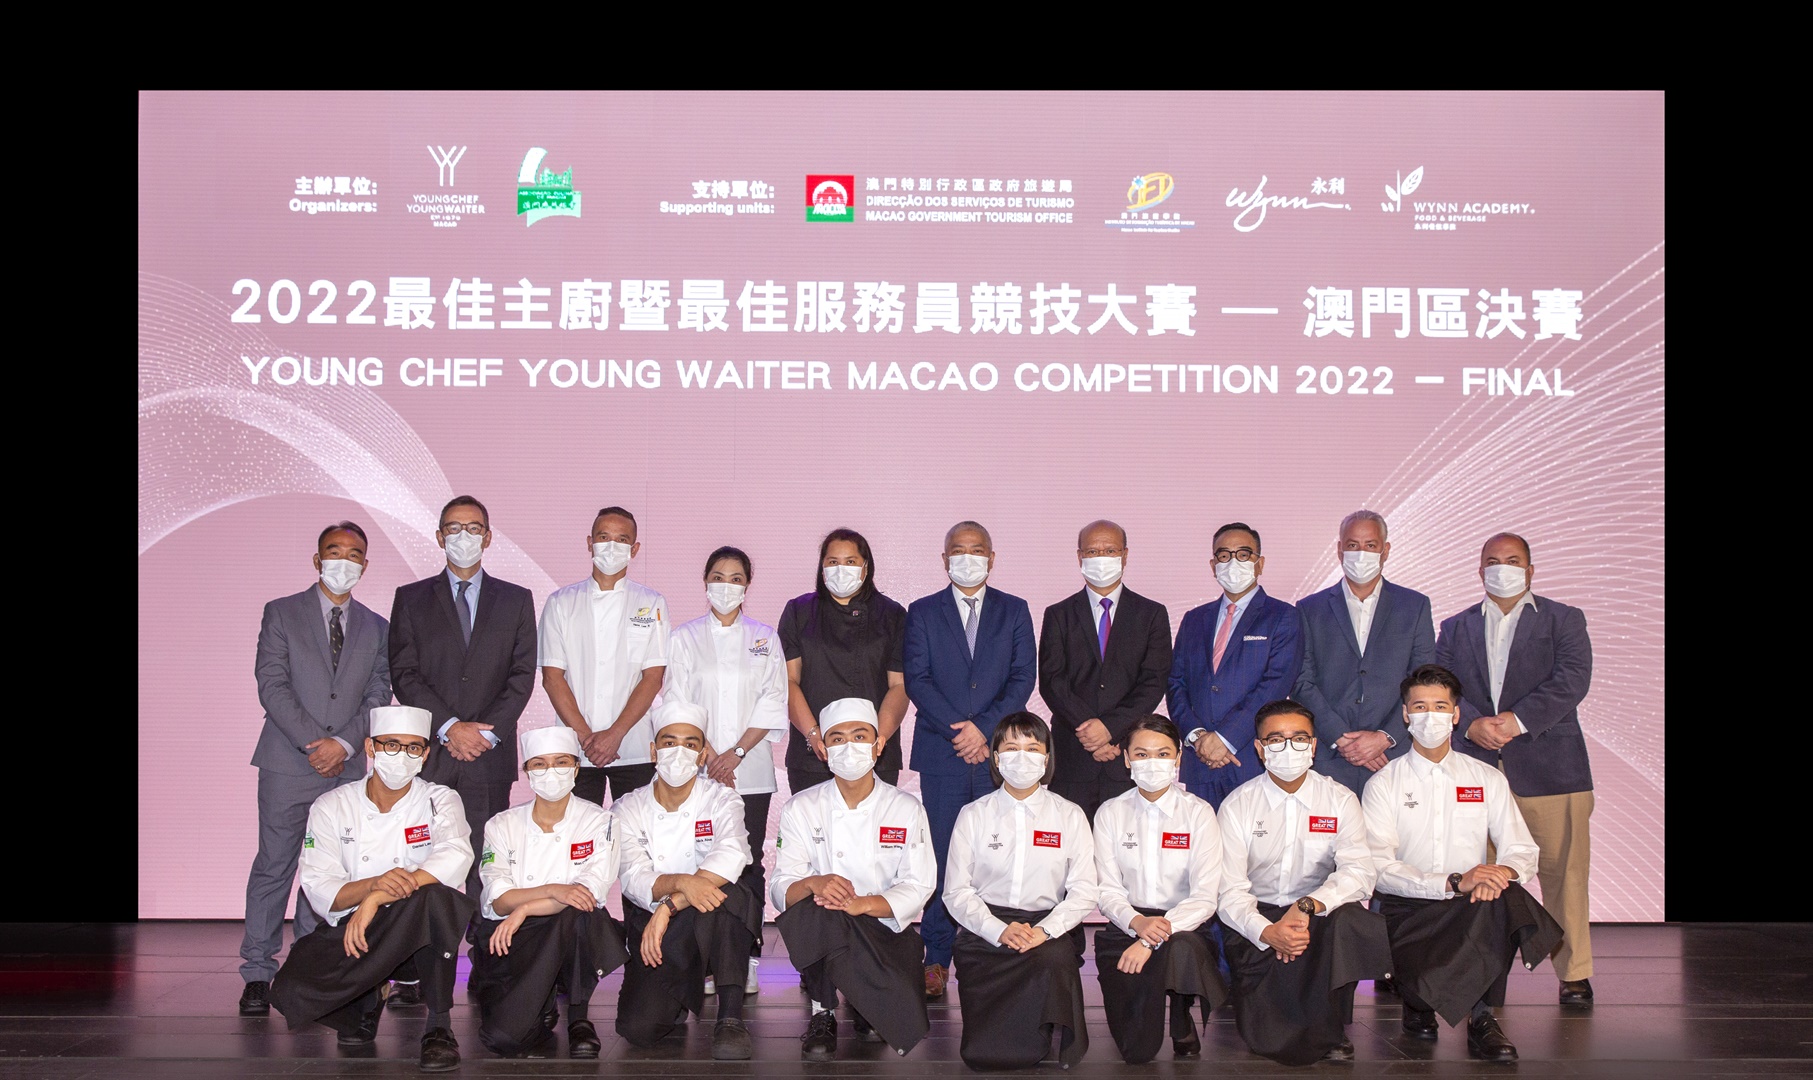 Young Chef Young Waiter Macao Competition 2022 Award